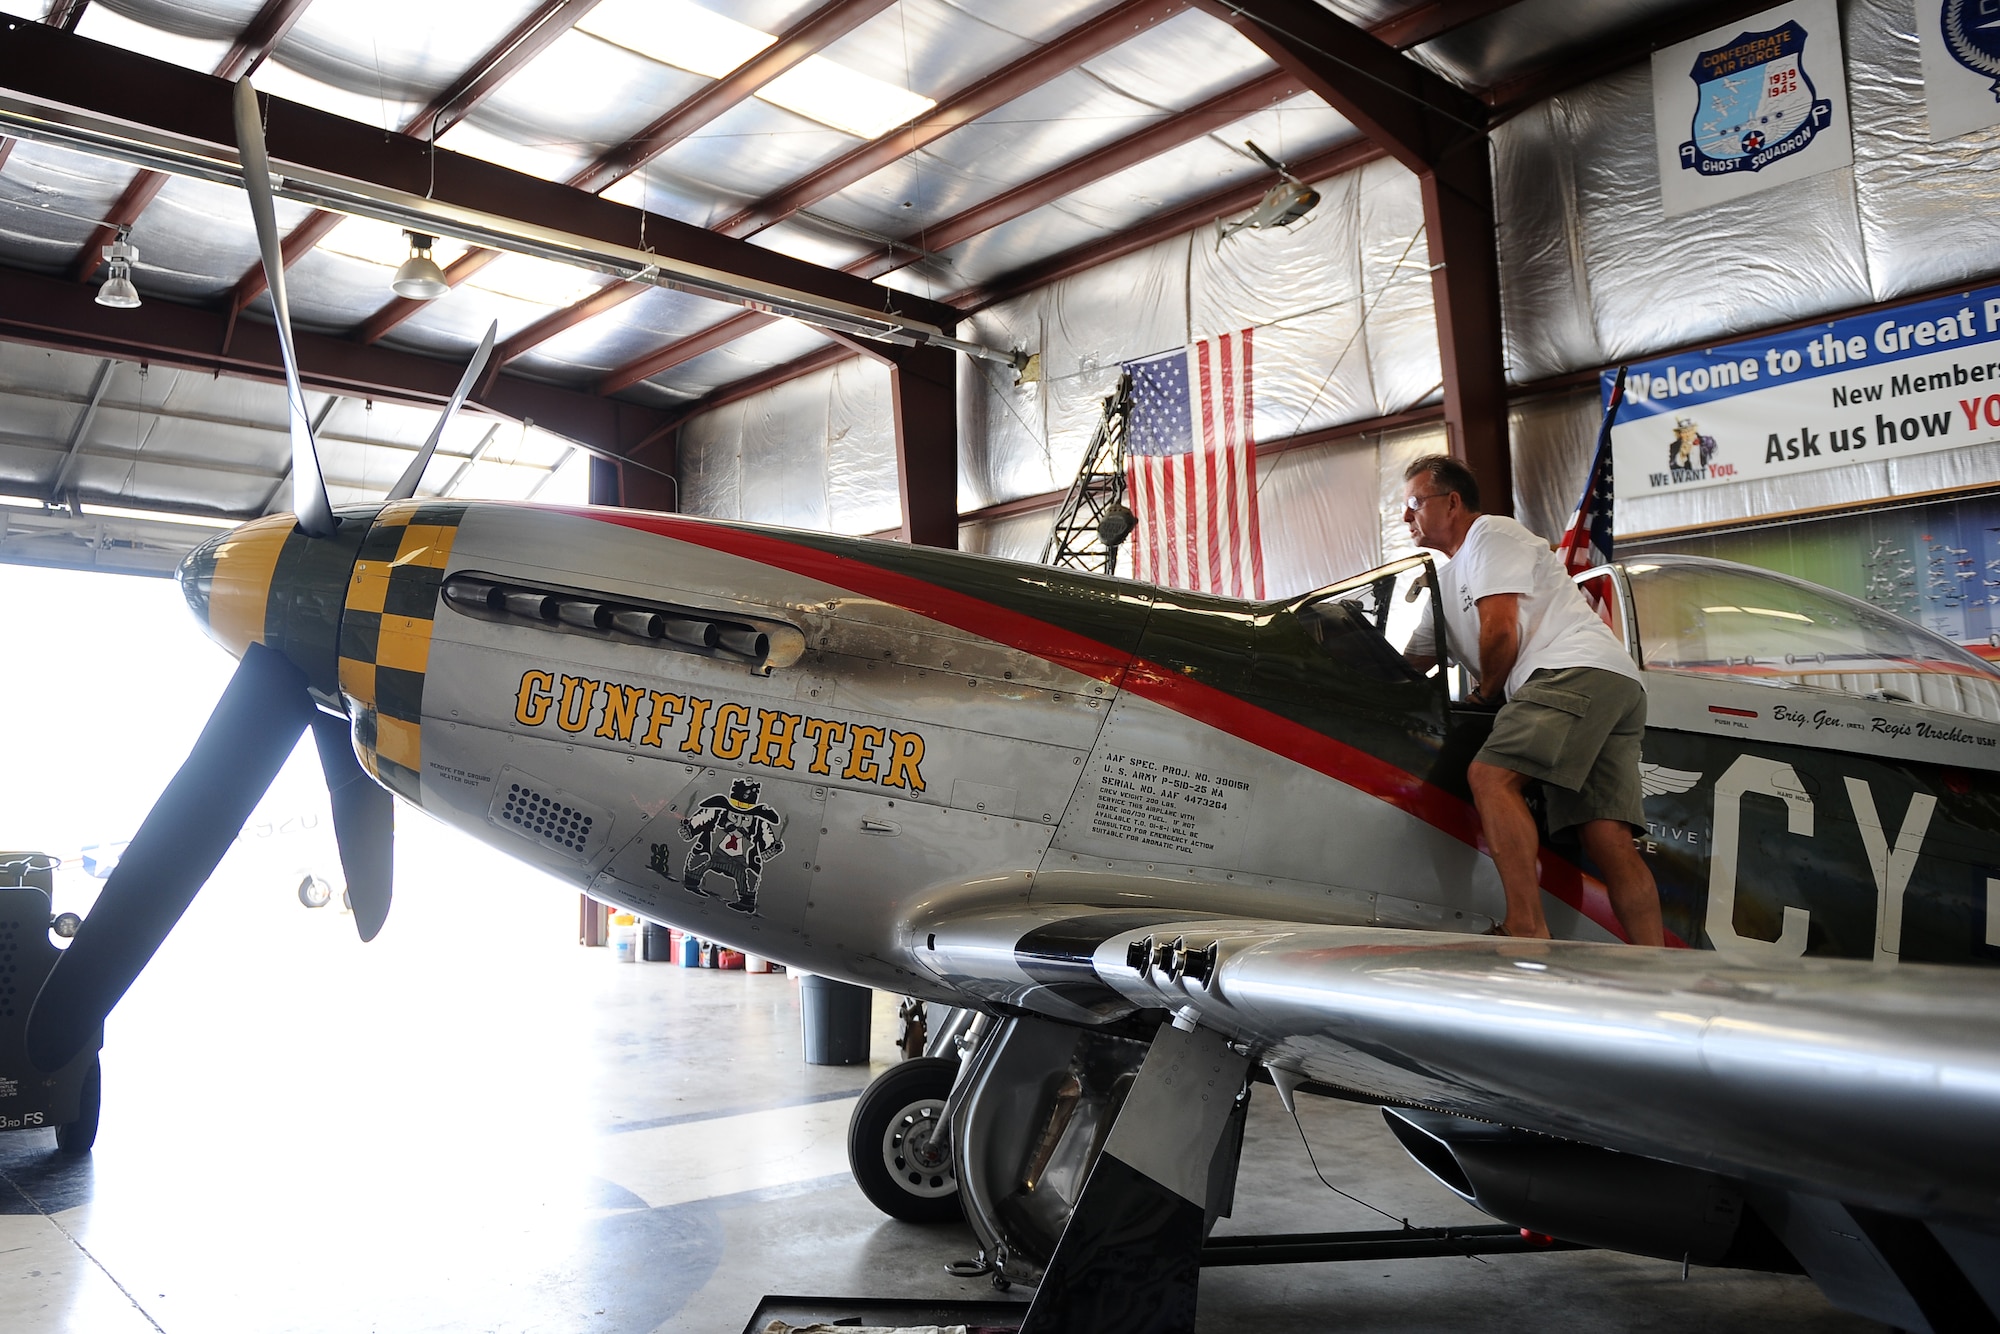 Larry Lumpkin, P-51 Gunfighter Mustang pilot, stands on the wing of the aircraft as he prepares to pull it from a hangar located at the Council Bluffs Municipal Airport, Iowa, on June 27. Lumpkin has amassed more than 700 hours in the in the Mustang cockpit performing an average of eight-to-ten air shows annually.  (U.S. Air Force photo by Josh Plueger/Released)